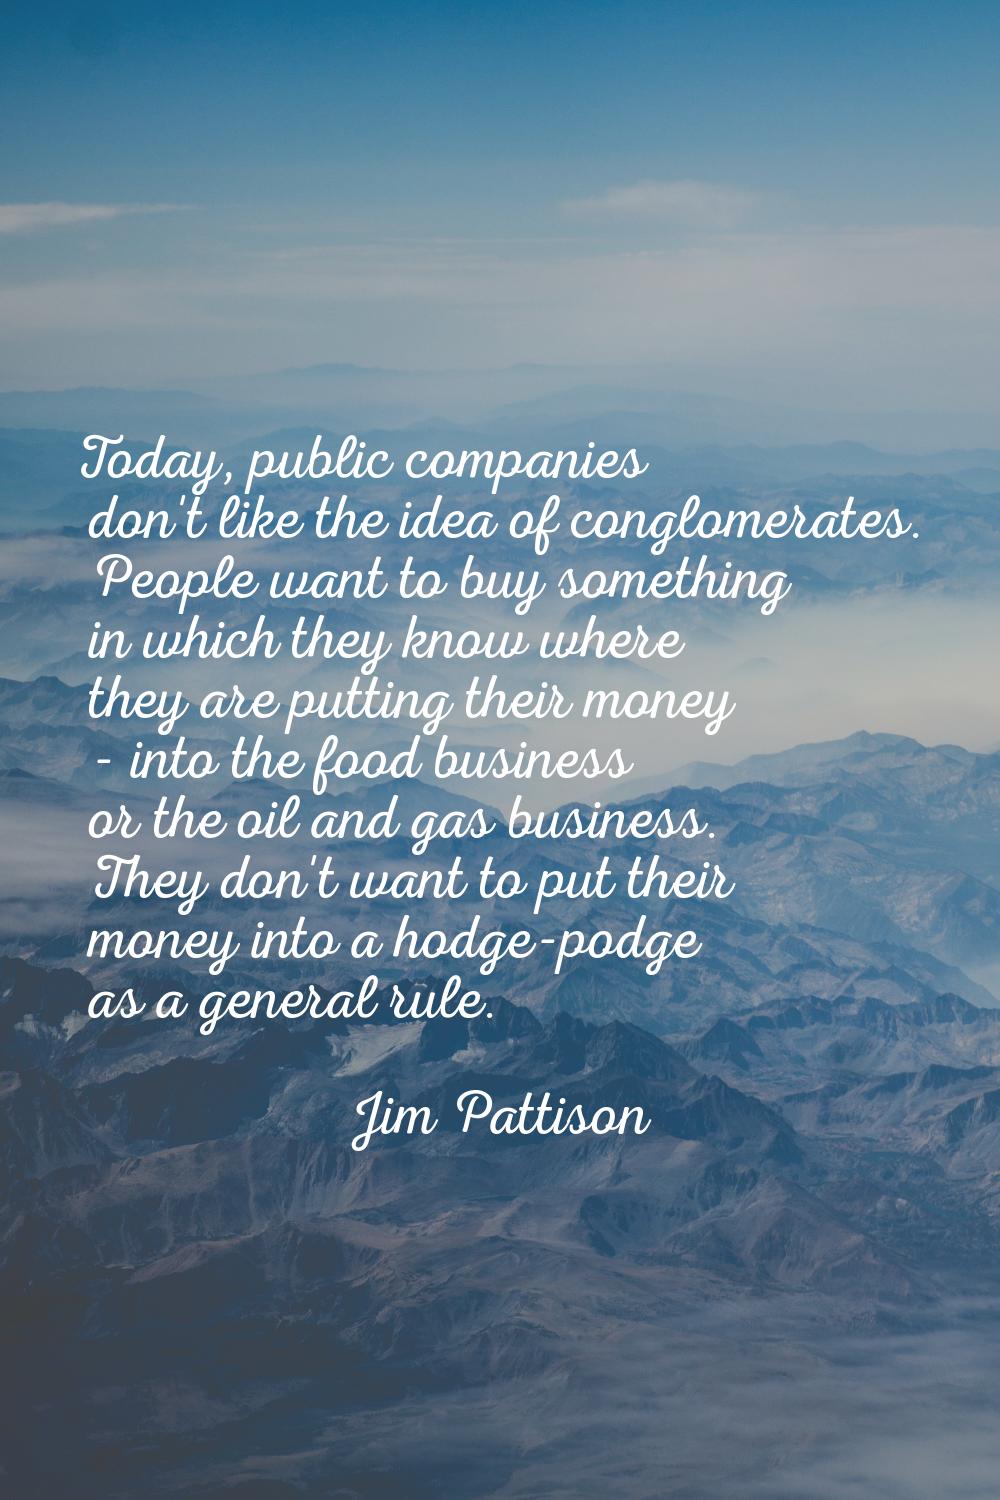 Today, public companies don't like the idea of conglomerates. People want to buy something in which